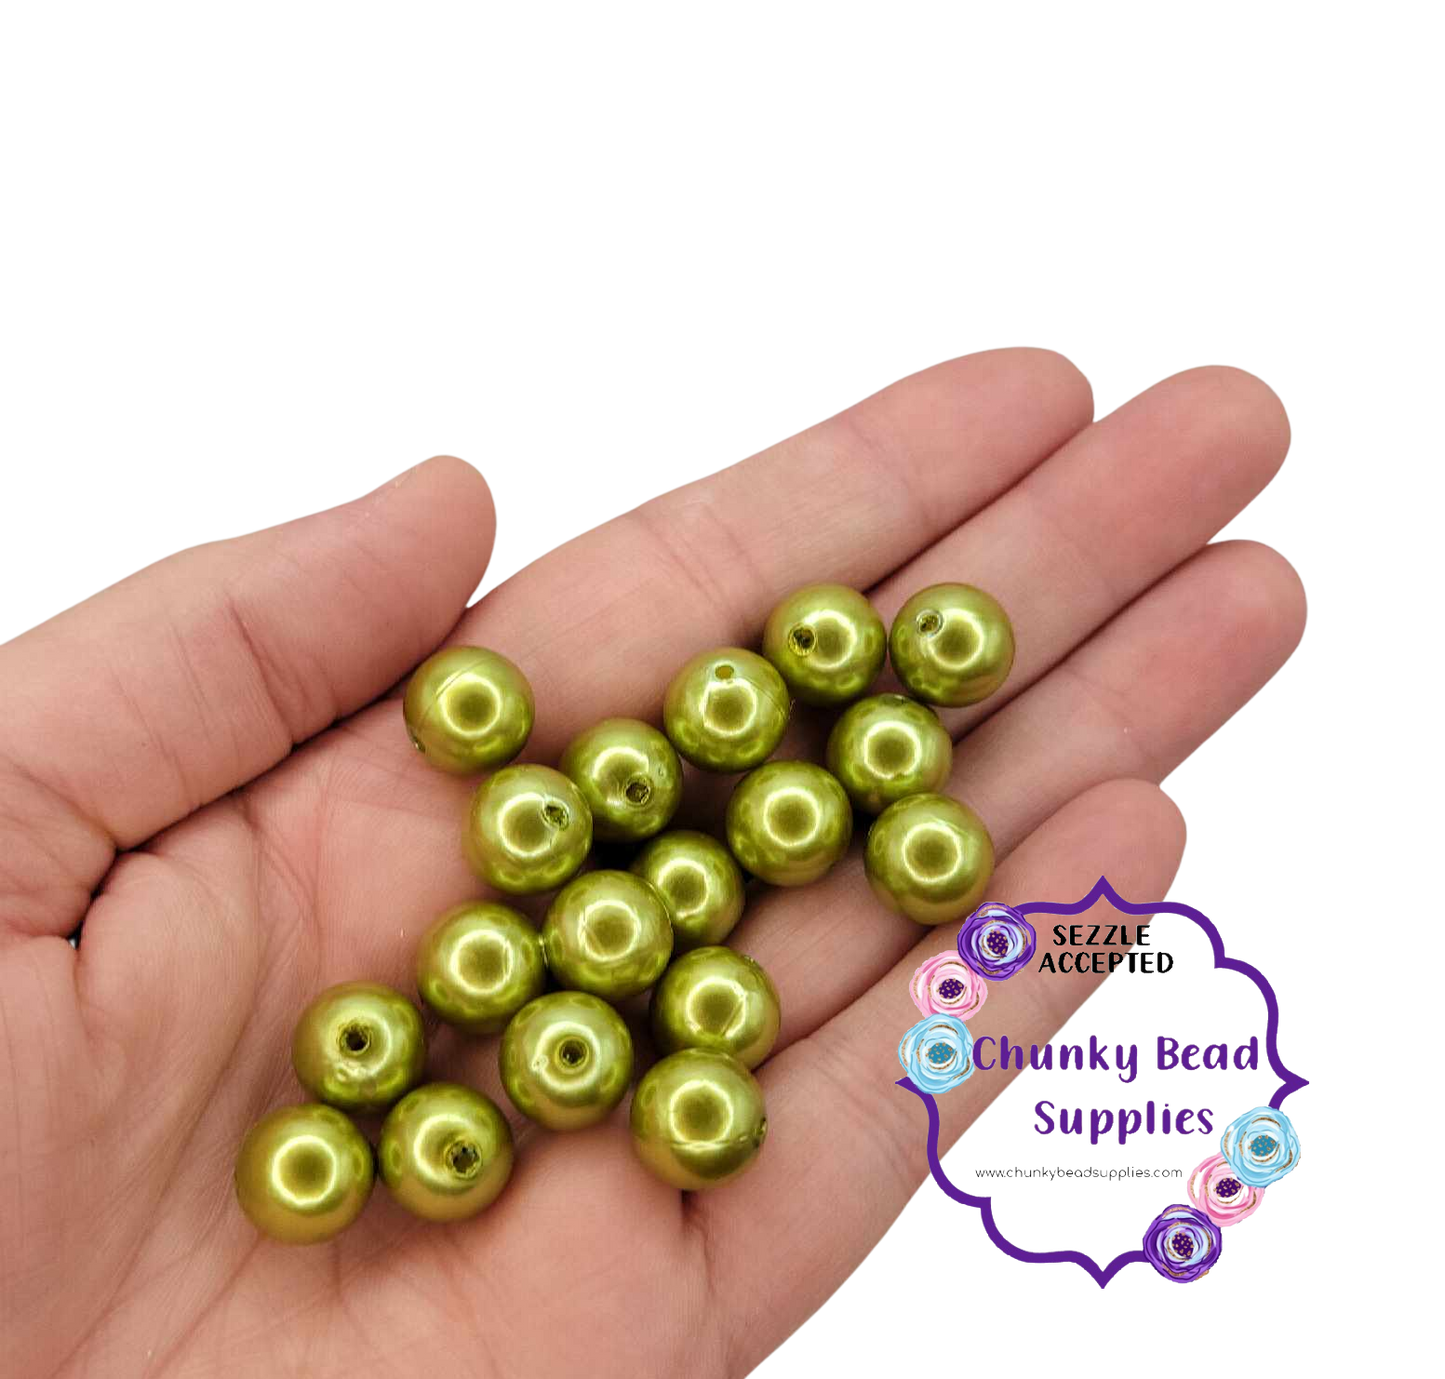 12mm "Olive Green" Acrylic Pearls